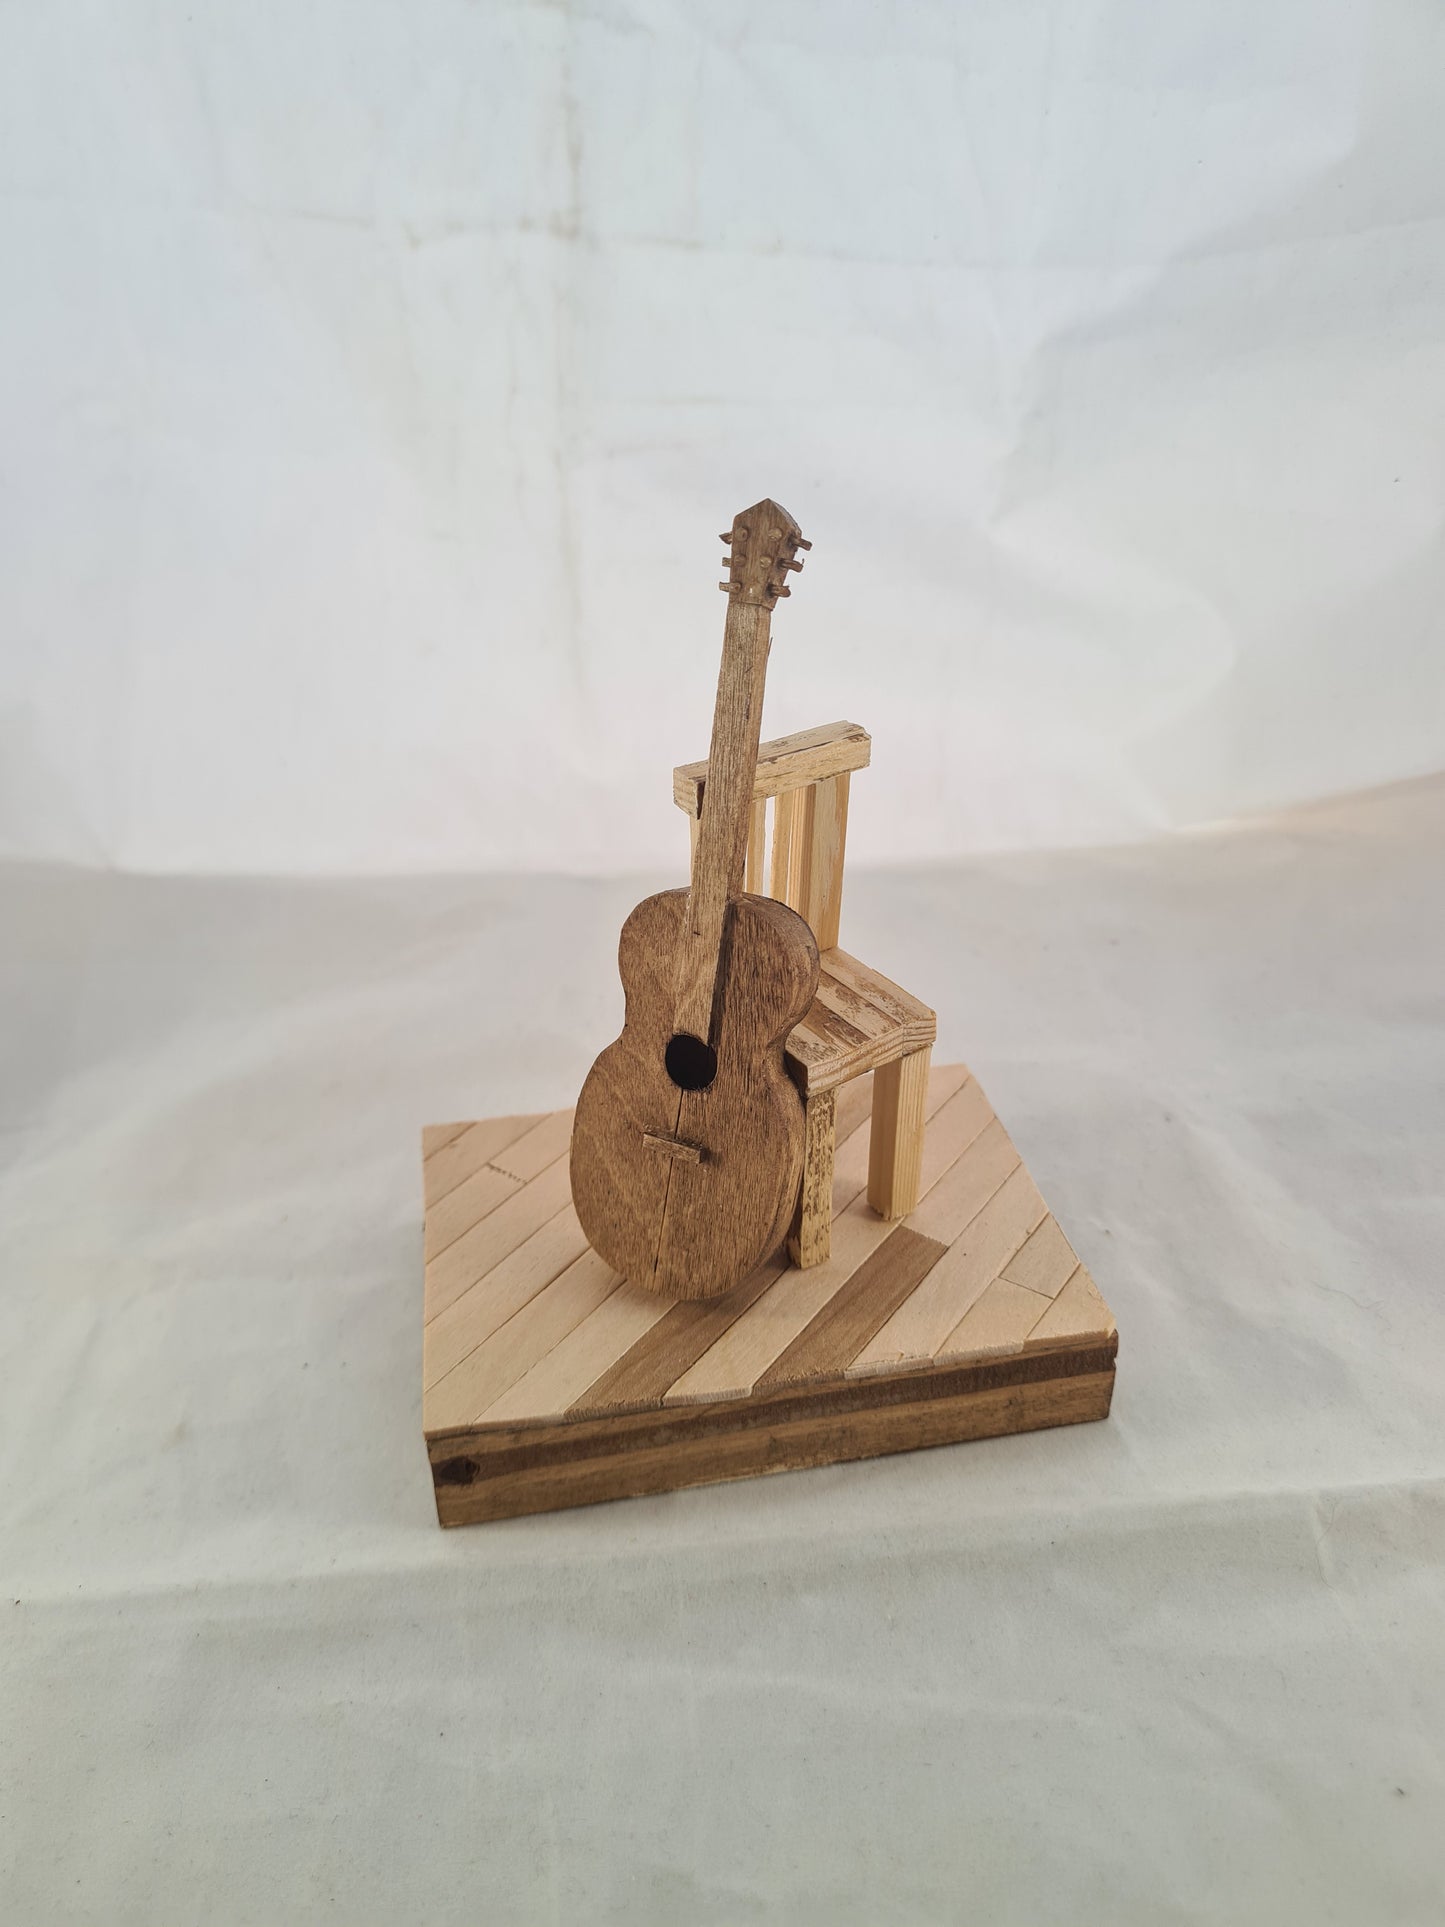 Seated Acoustic - Handcrafted Wooden Matchstick Figures - Gifts, Ornaments and Decor By Tiggidy Designs